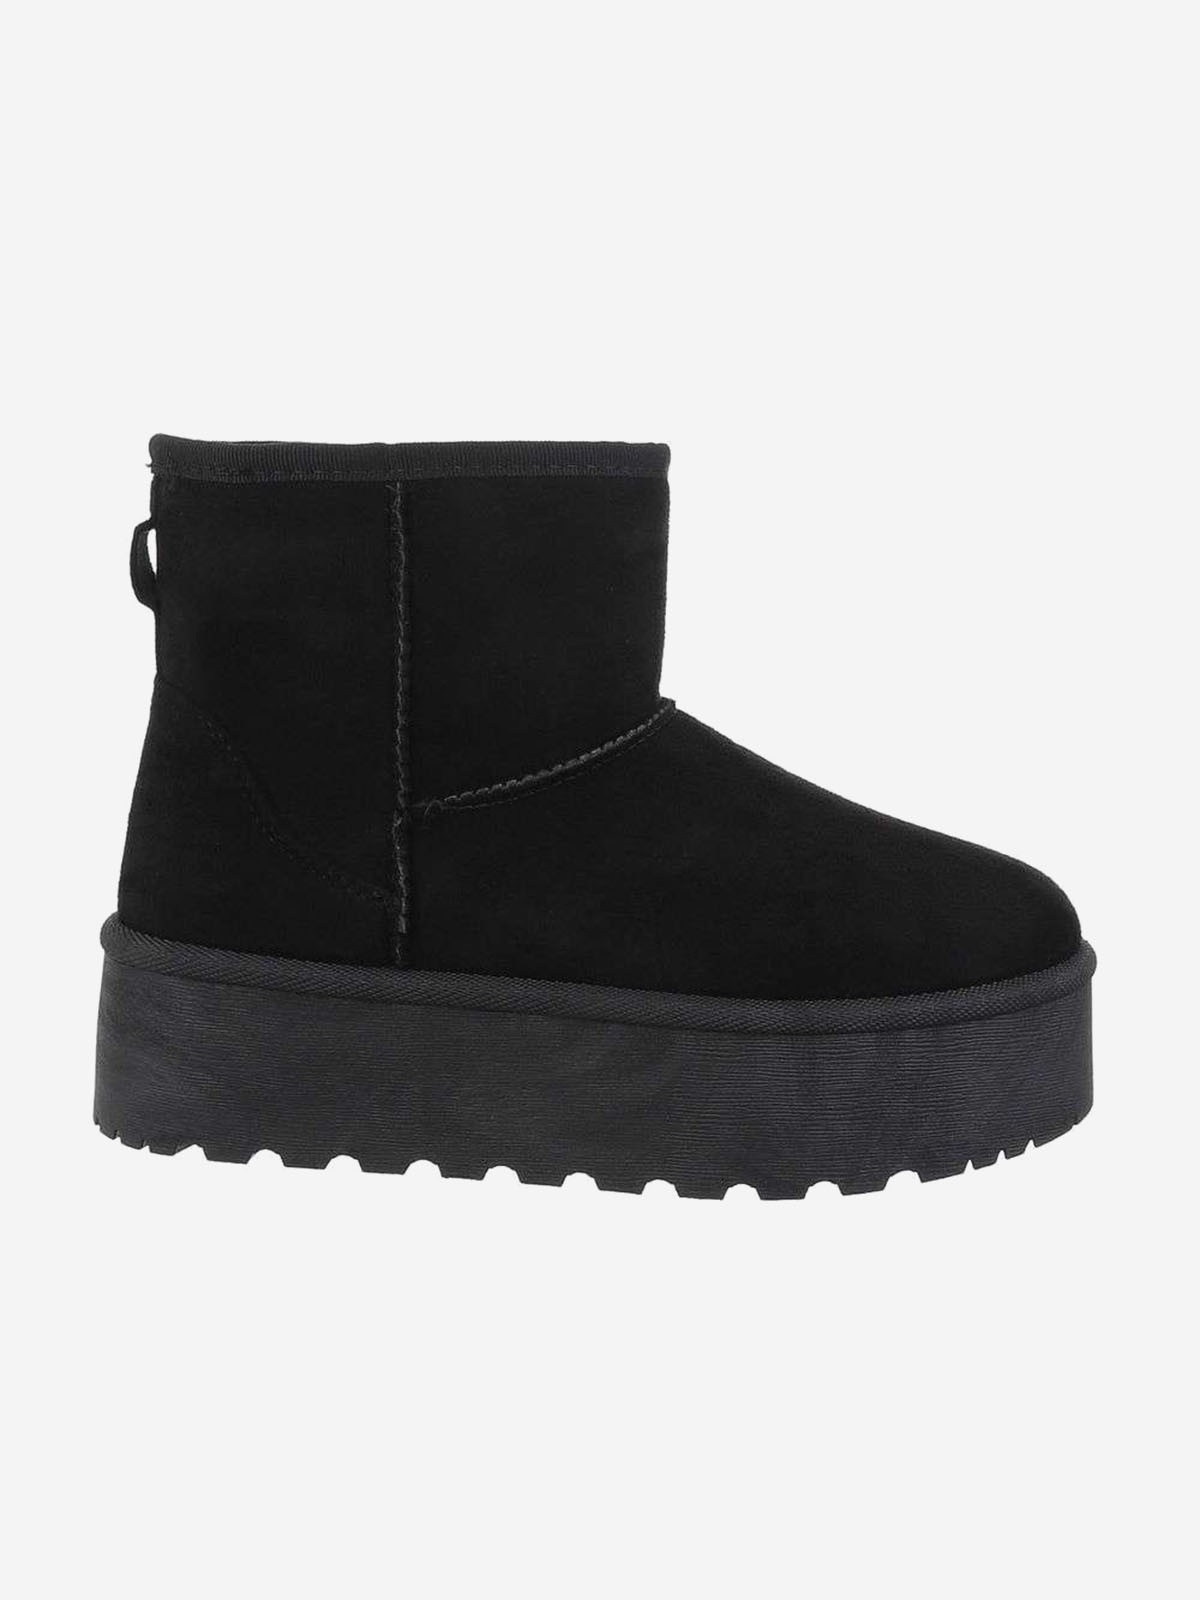 UGG type women's ankle shoes with platform in black